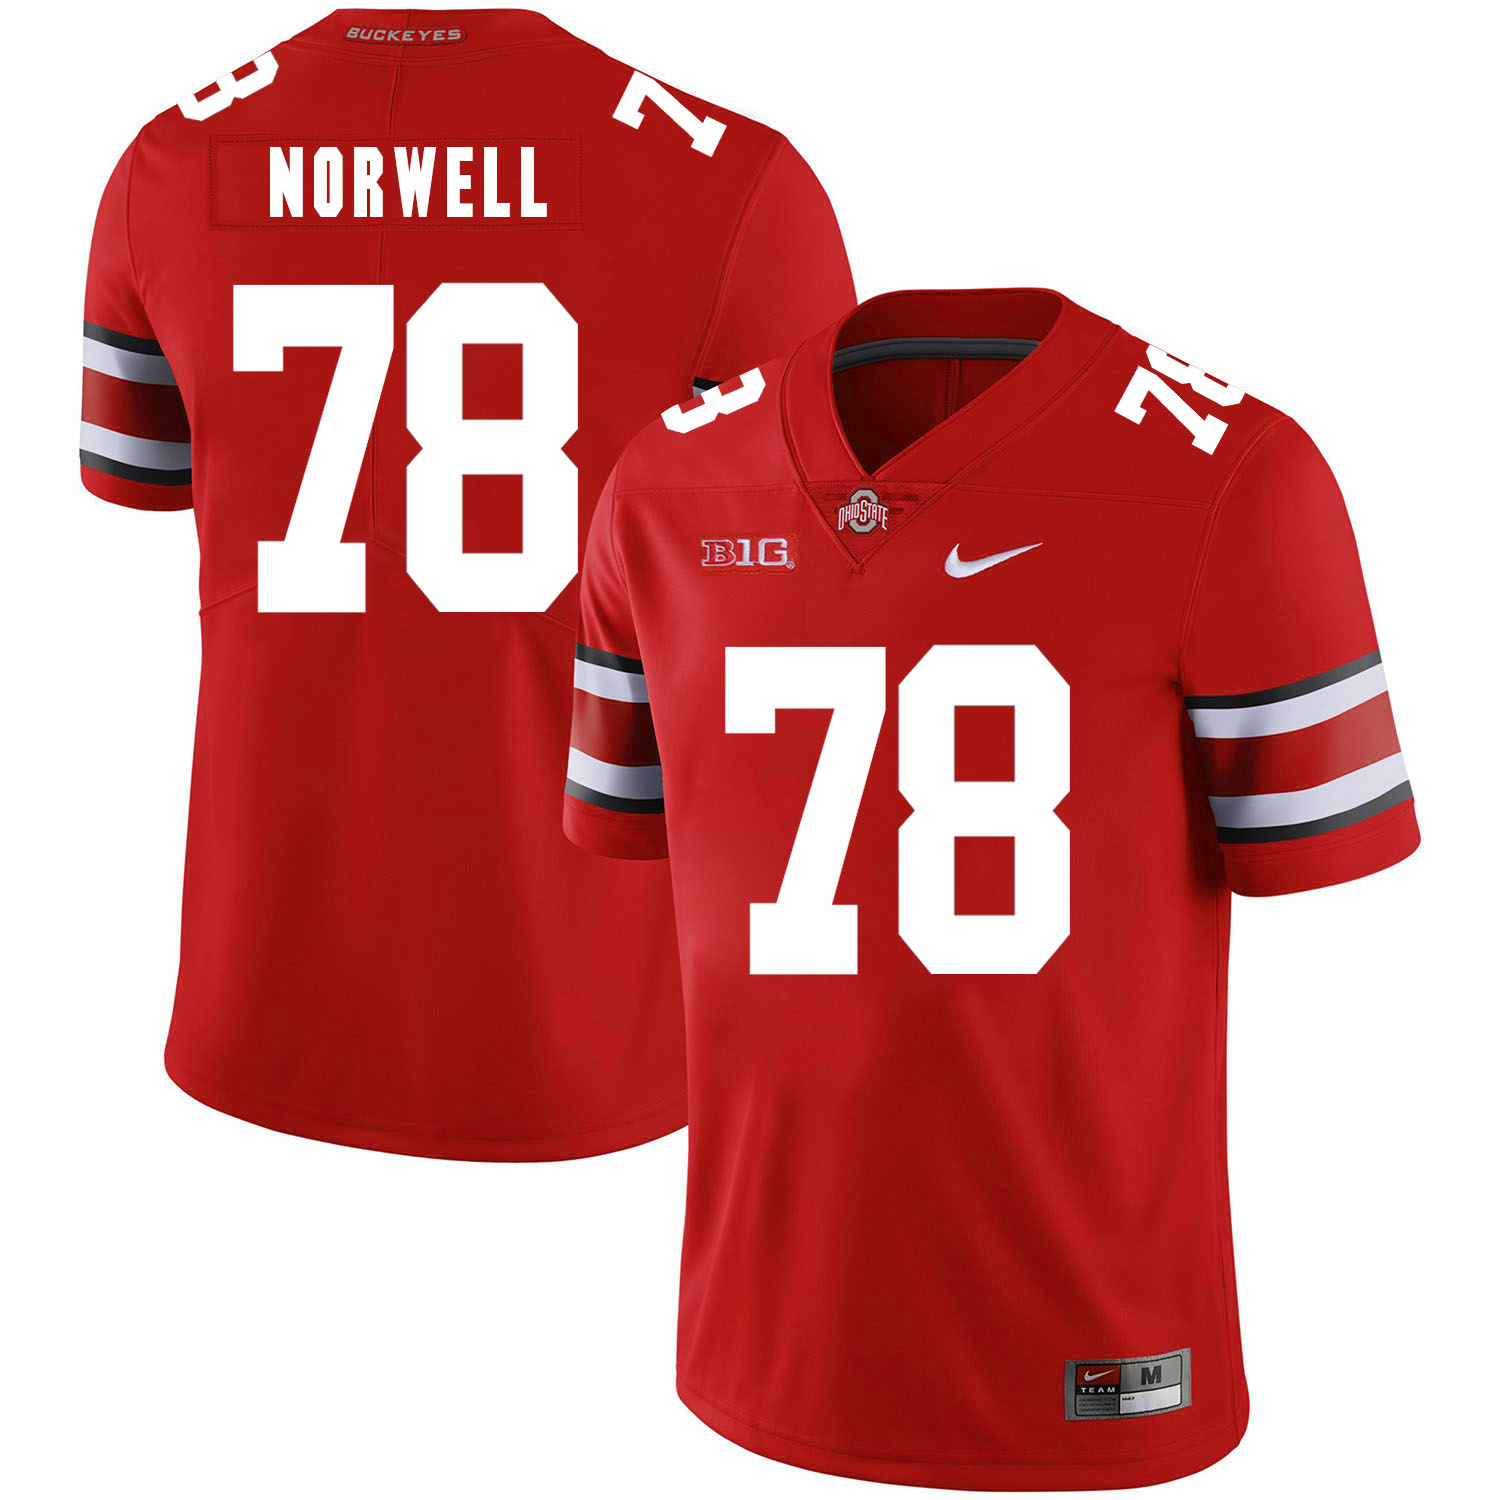 Ohio State Buckeyes 78 Andrew Norwell Red Nike College Football Jersey